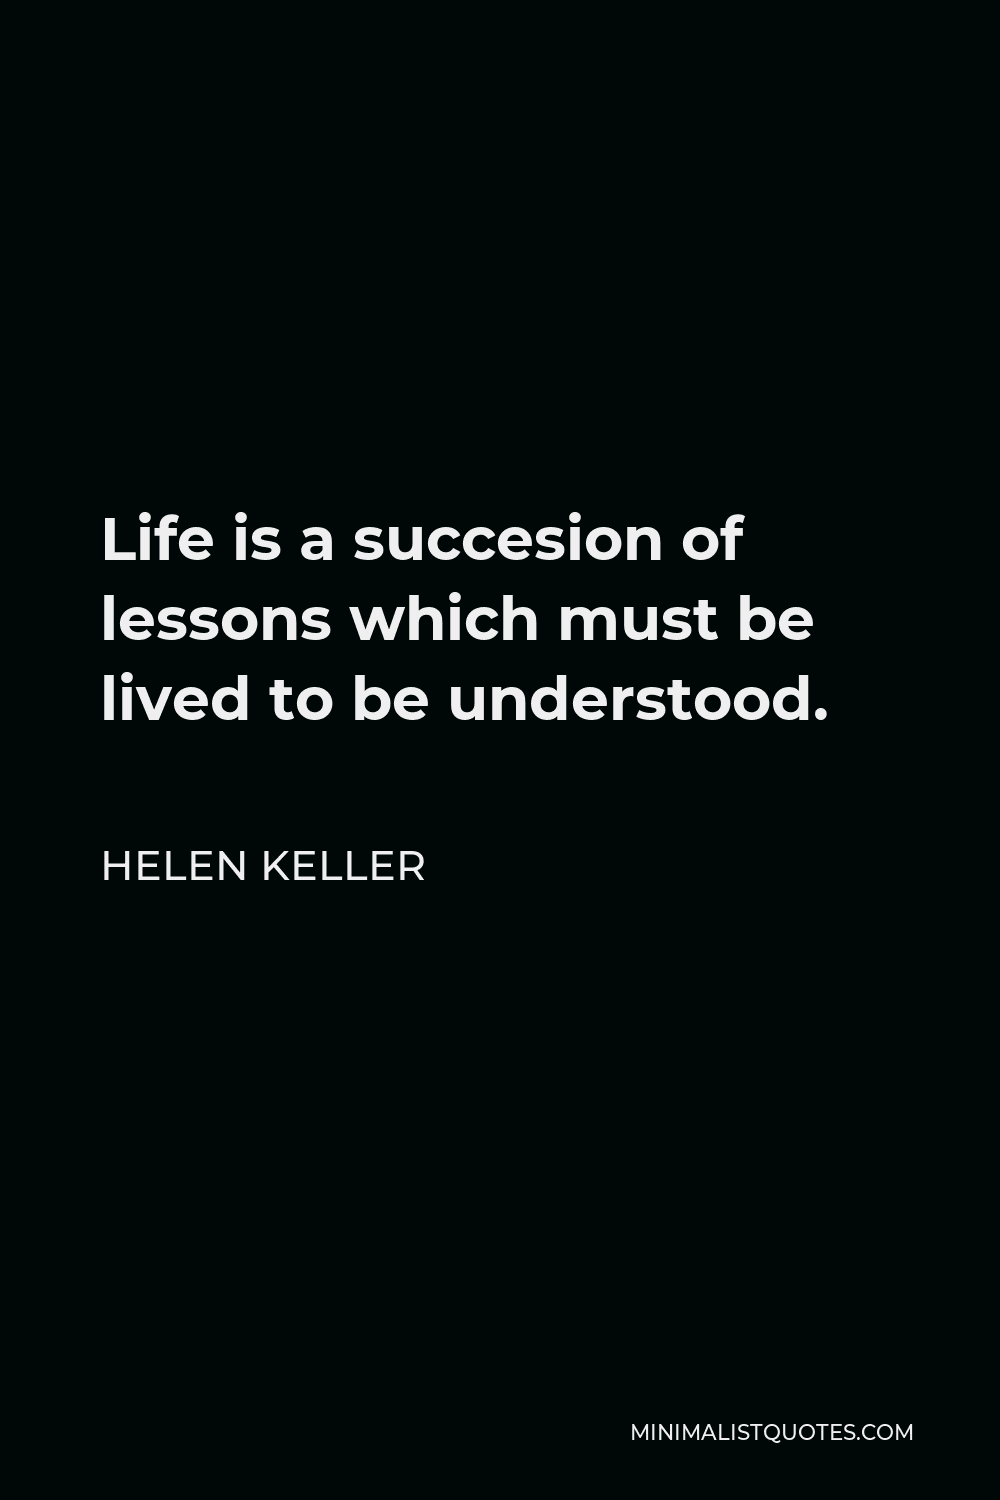 Helen Keller Quote - Life is a succesion of lessons which must be lived to be understood.